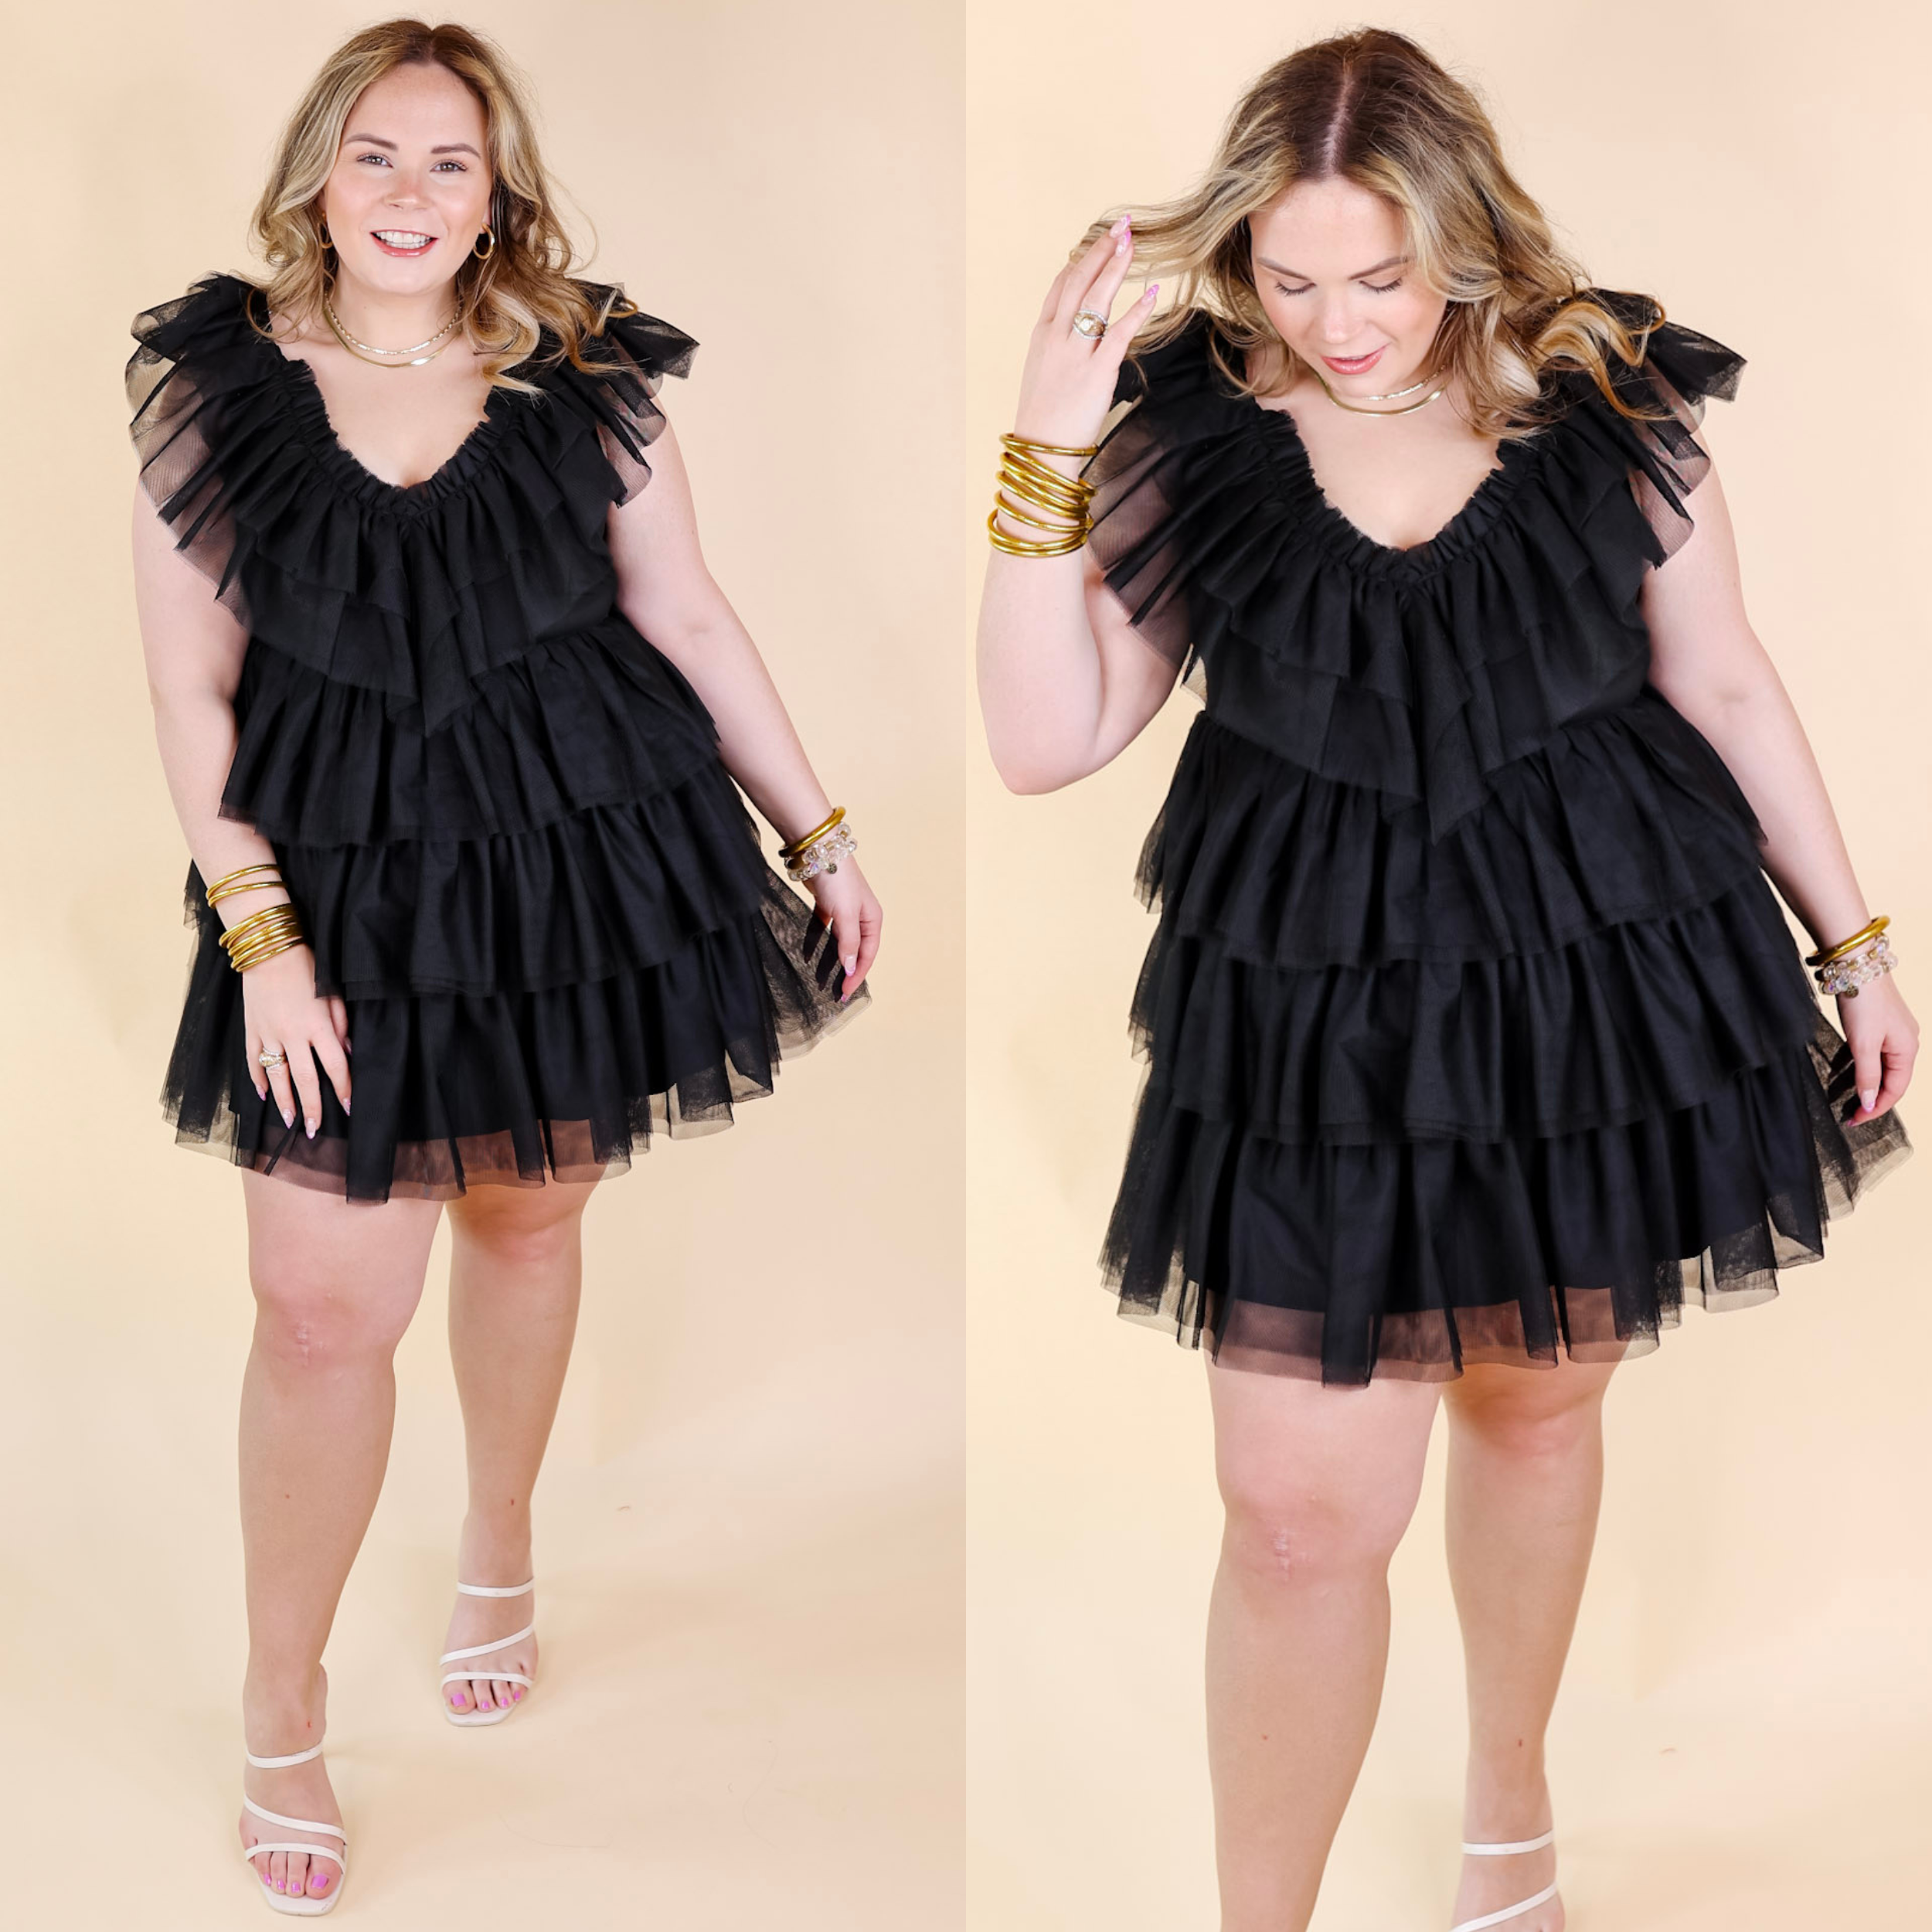 Model is wearing a black short dress made of ruffle tulle. Model has this dress paired with white strappy heels and gold jewelry.